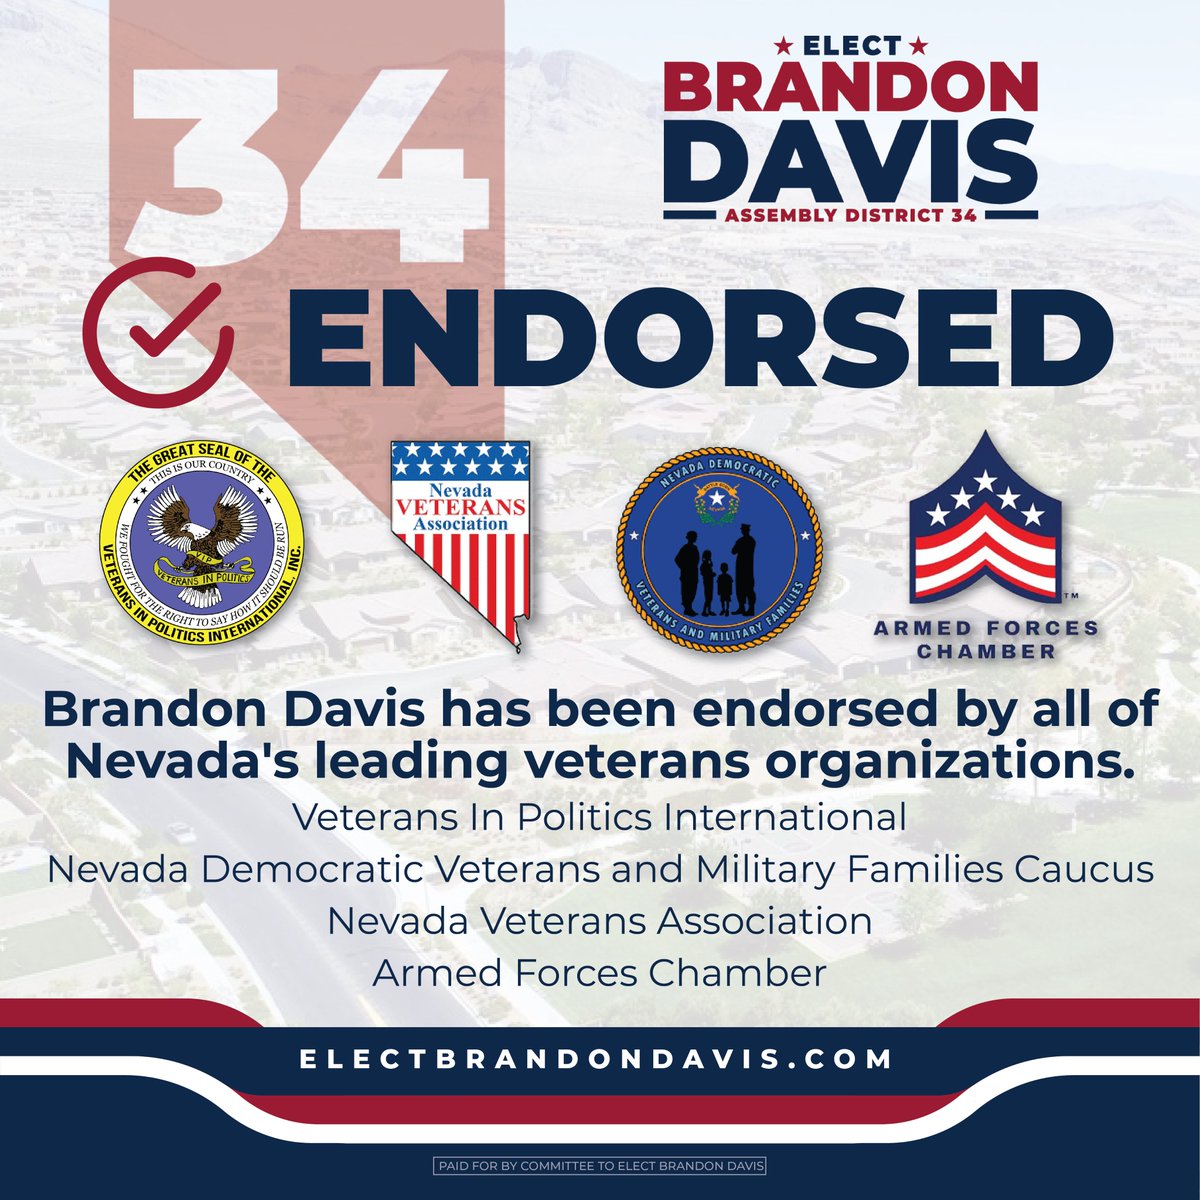 I have deep connections with many veterans, so I wear this one as a badge of honor. I appreciate Veterans In Politics International, @NV_Dem_Vets, Nevada Veterans Association, and the @ArmedForcesCham for their trust and support. I'll be a strong advocate for veterans issues